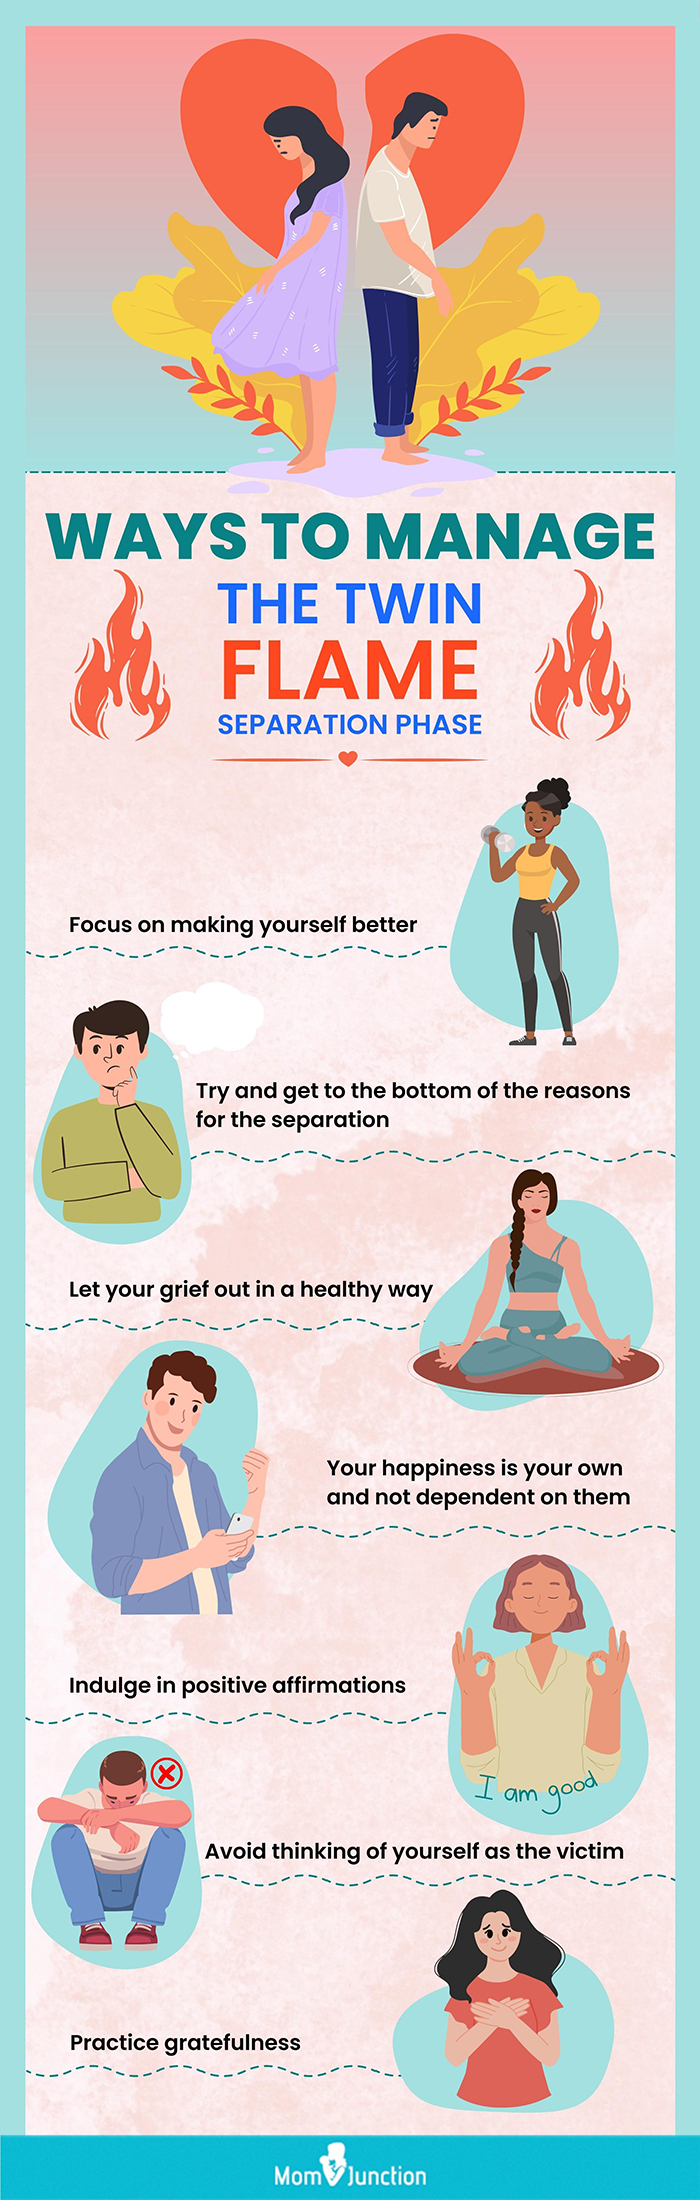 ways to manage the twin flame separation phase (infographic)